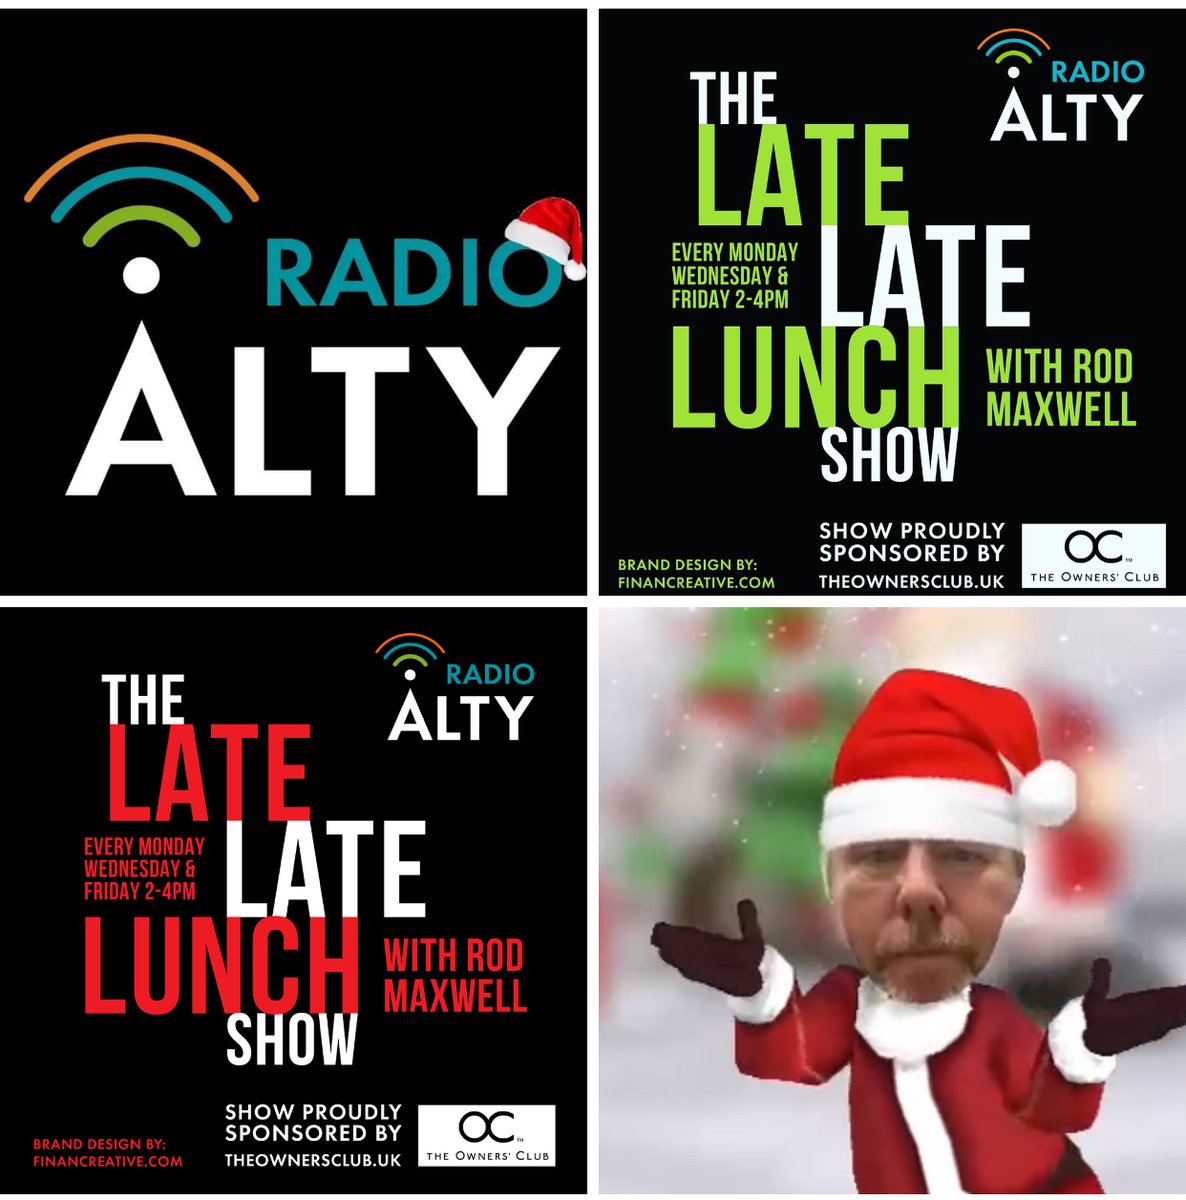 #theLateLateChristmasLunchshow at 2pm - Rod Maxwell plays some of his Xmas favs with a few people popping in. RadioAlty.co.uk - online, apps, #Alexa. #Christmas2023 #Xmas2023